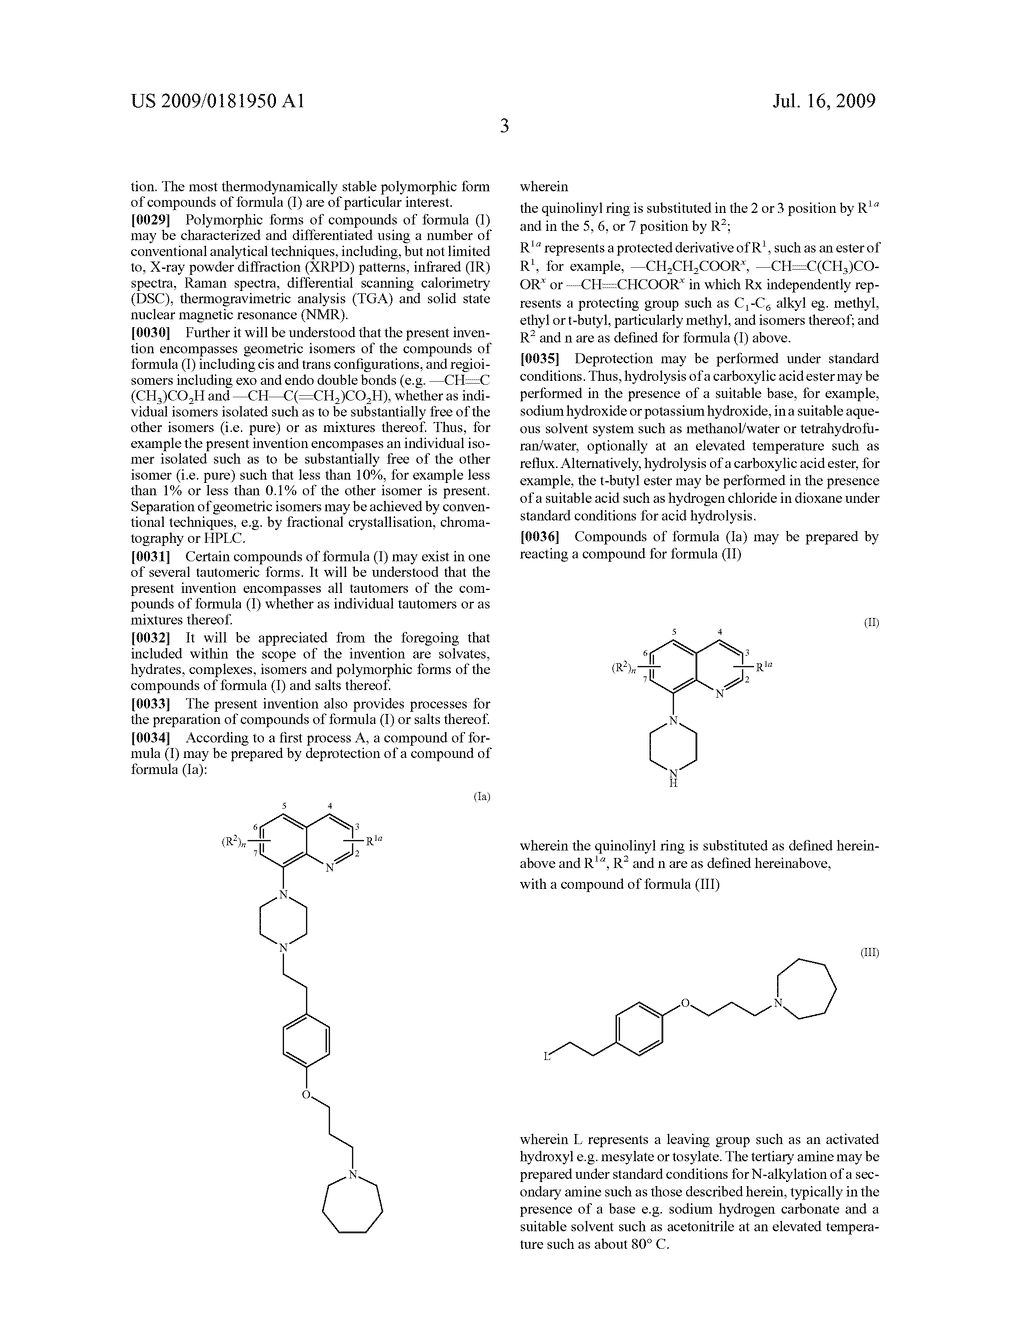 Histamine Receptor Antagonists Comprising an Azepin Core - diagram, schematic, and image 04